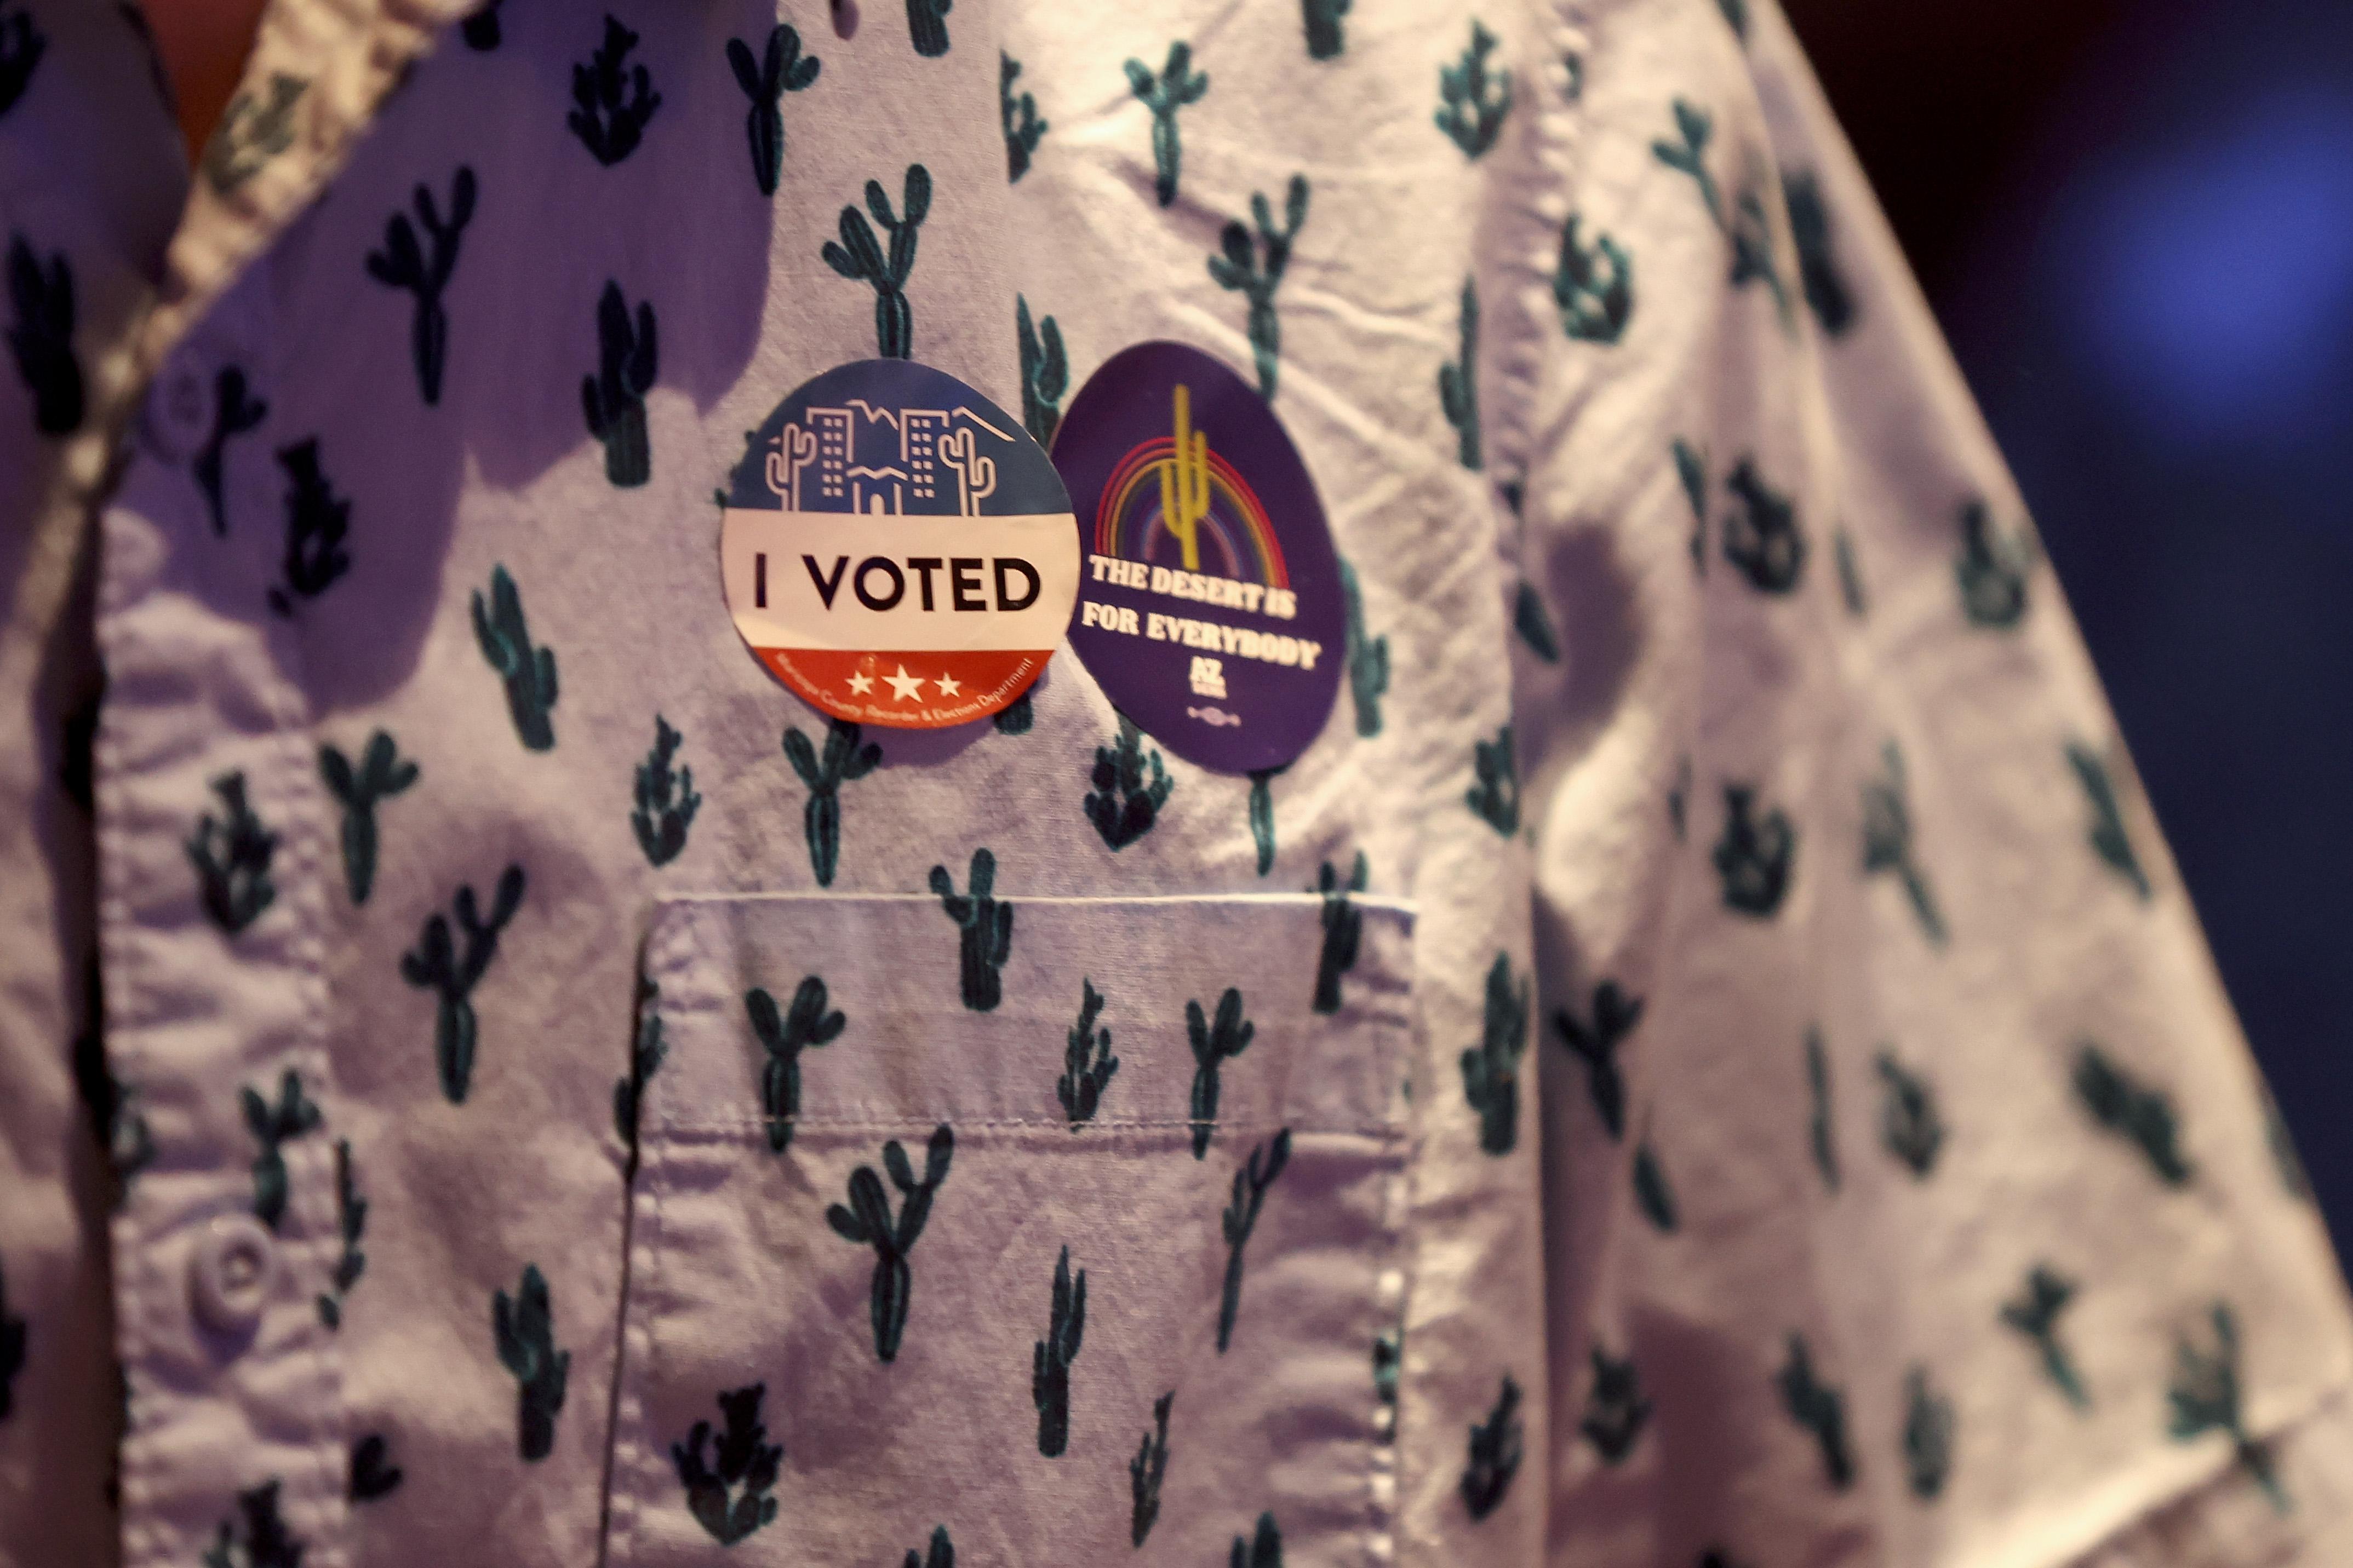 A close-up of a cactus shirt, an "I Voted sticker, and a sticker that says "The Desert Is for Everybody."